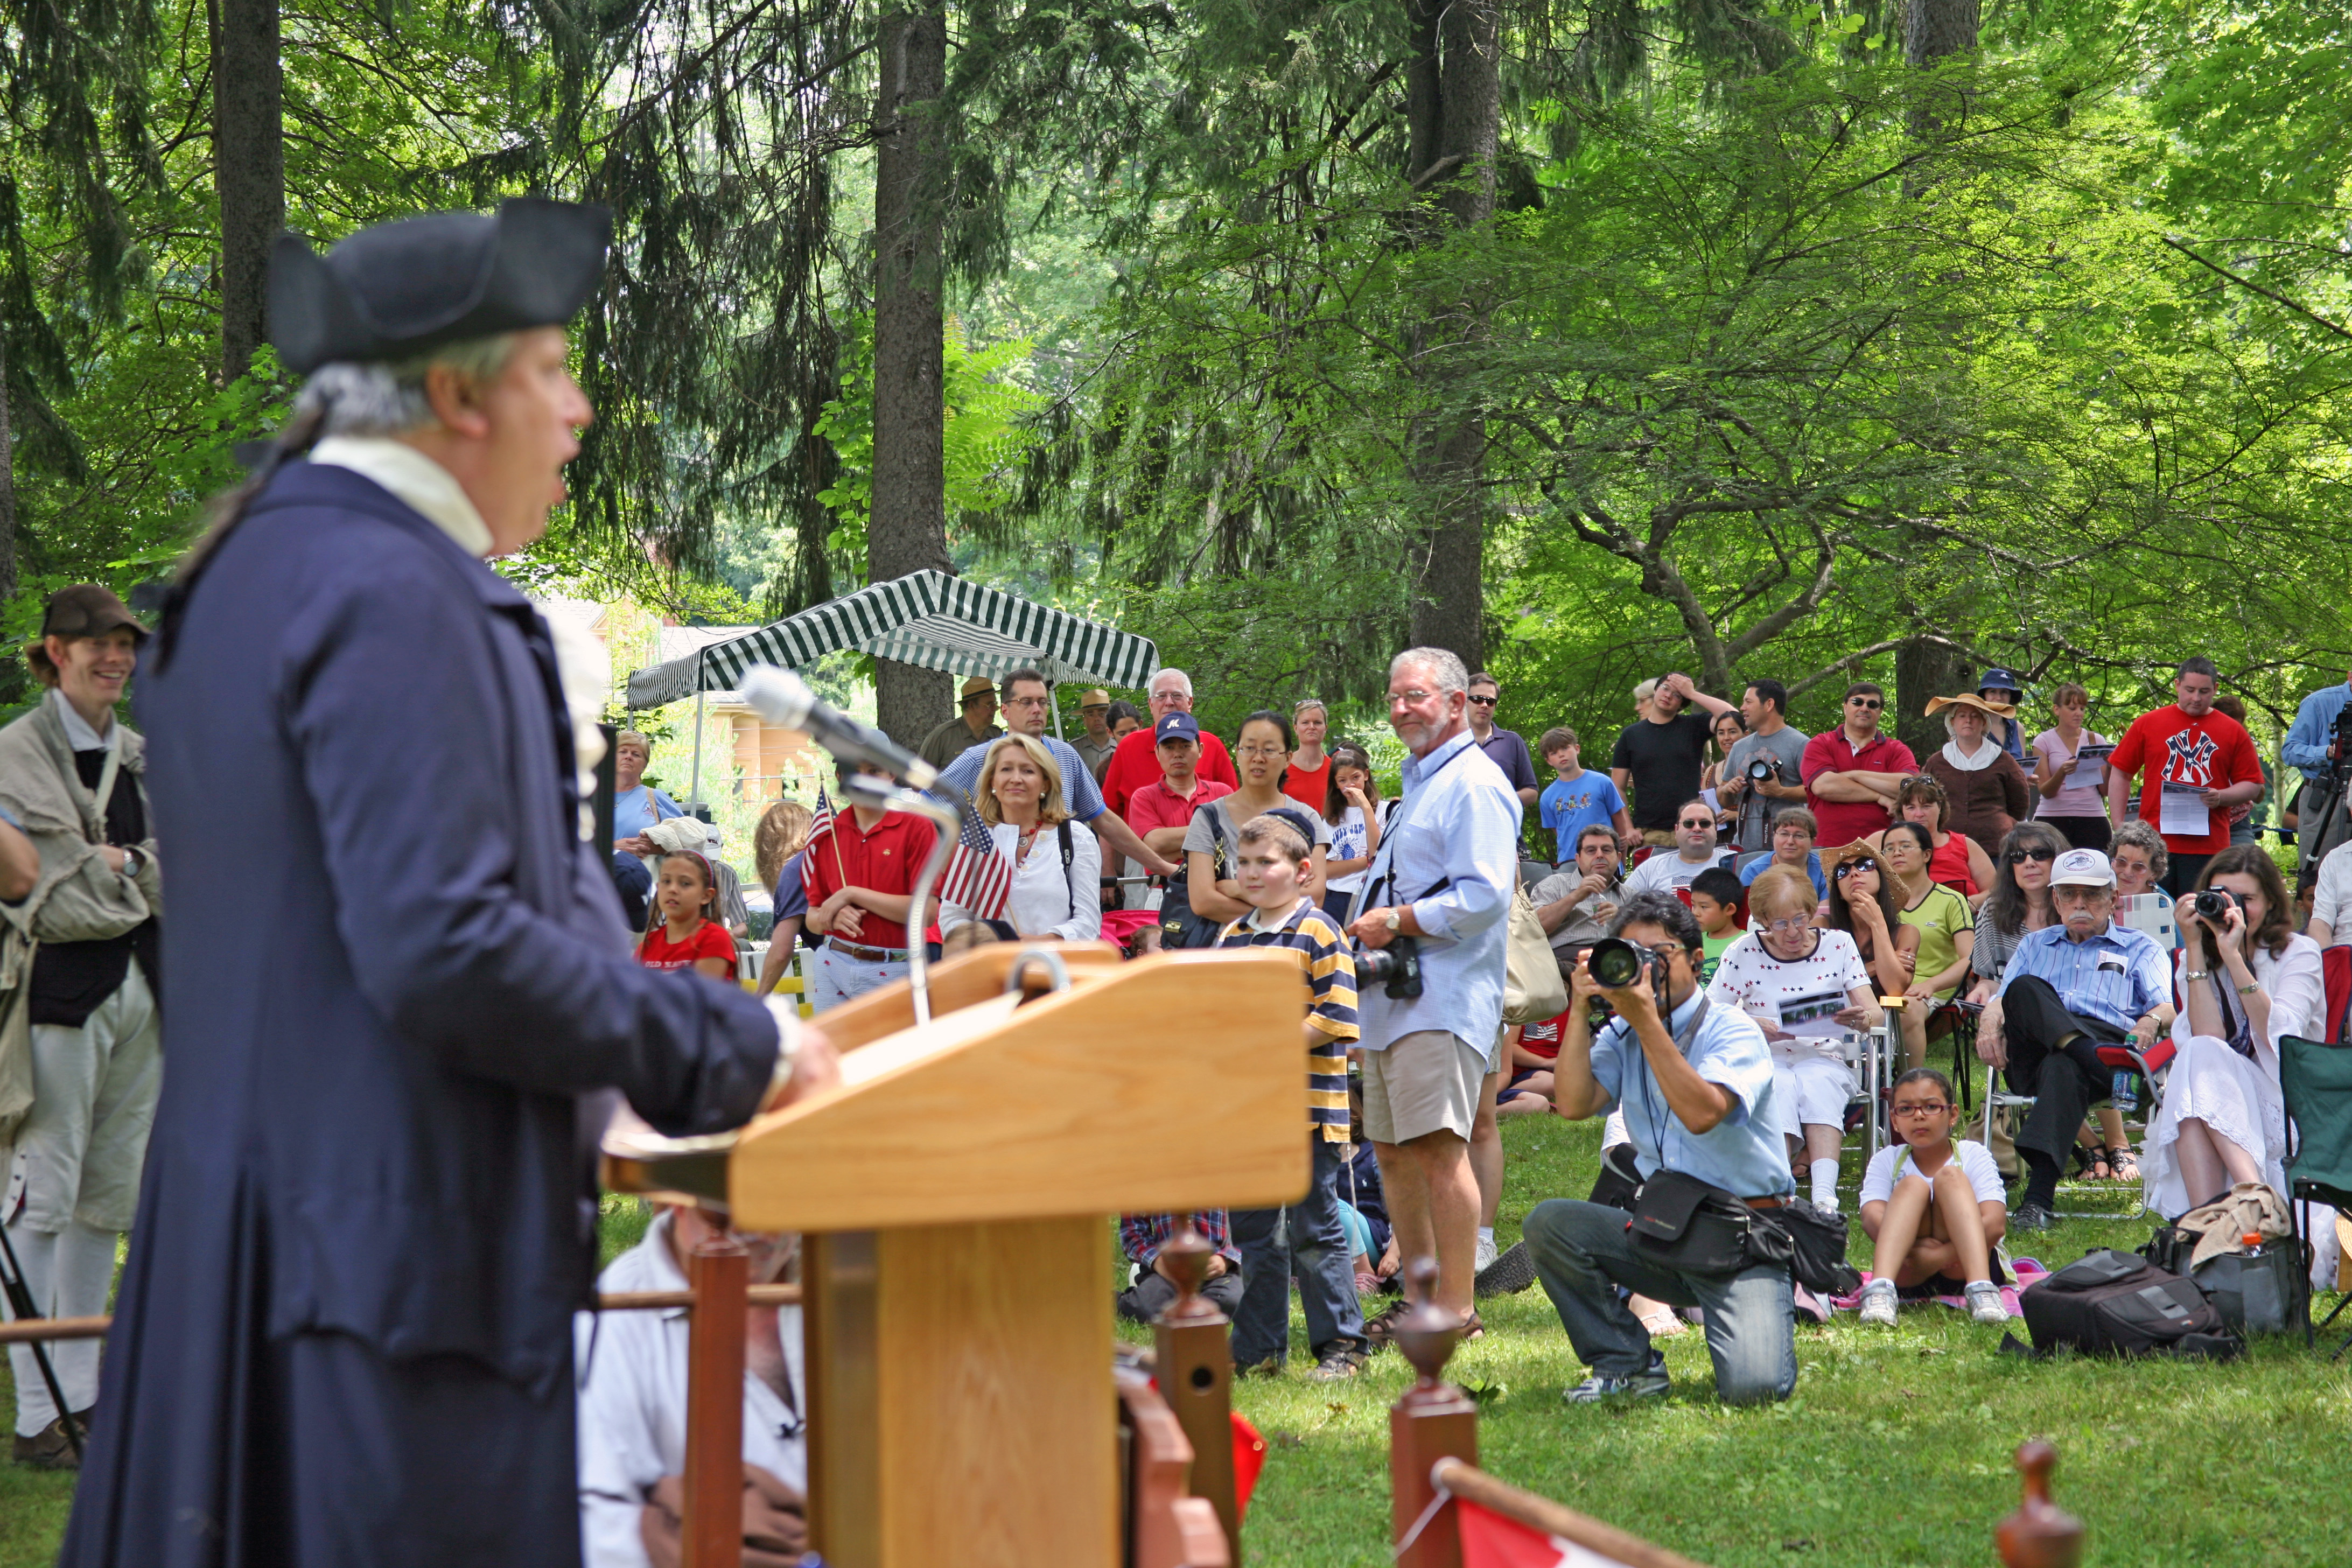 A speaker in colonial attire addresses a diverse crowd during an outdoor historical event. The audience includes children and adults, some holding American flags and taking photos, with a backdrop of trees and a canopy providing shade.